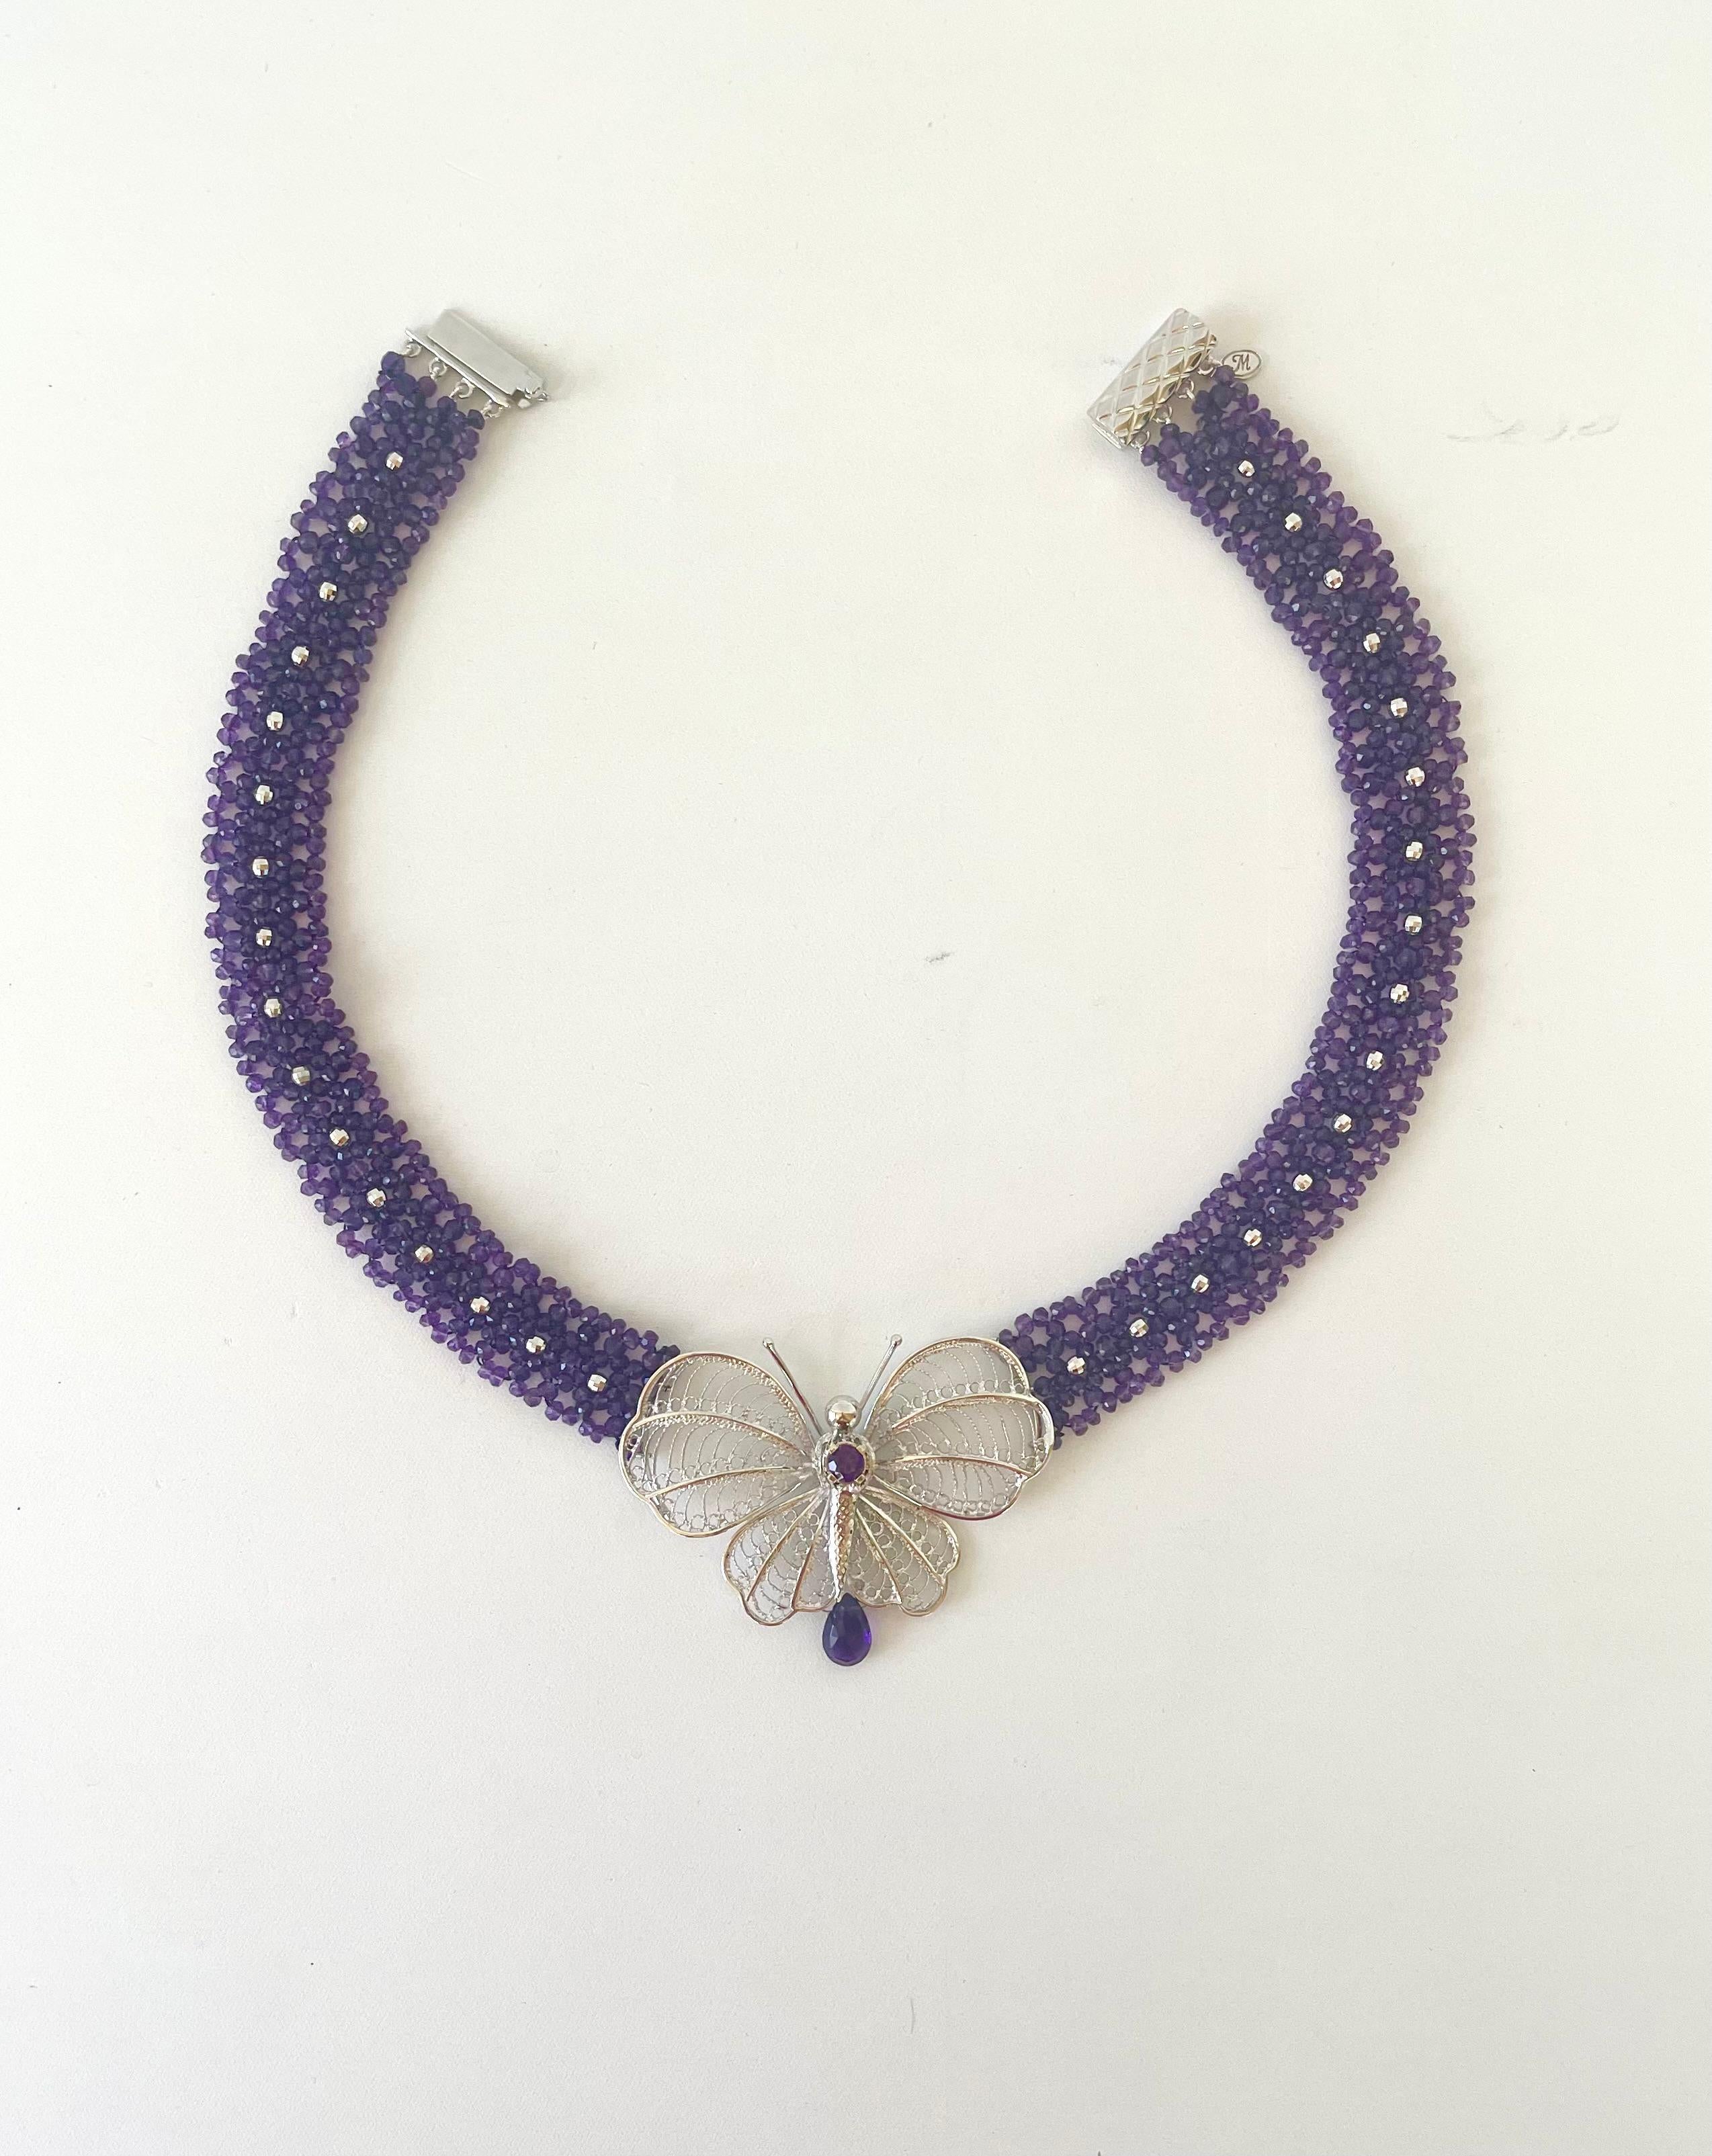 Woven Amethyst Necklace with Silver Butterfly Centerpiece For Sale 4